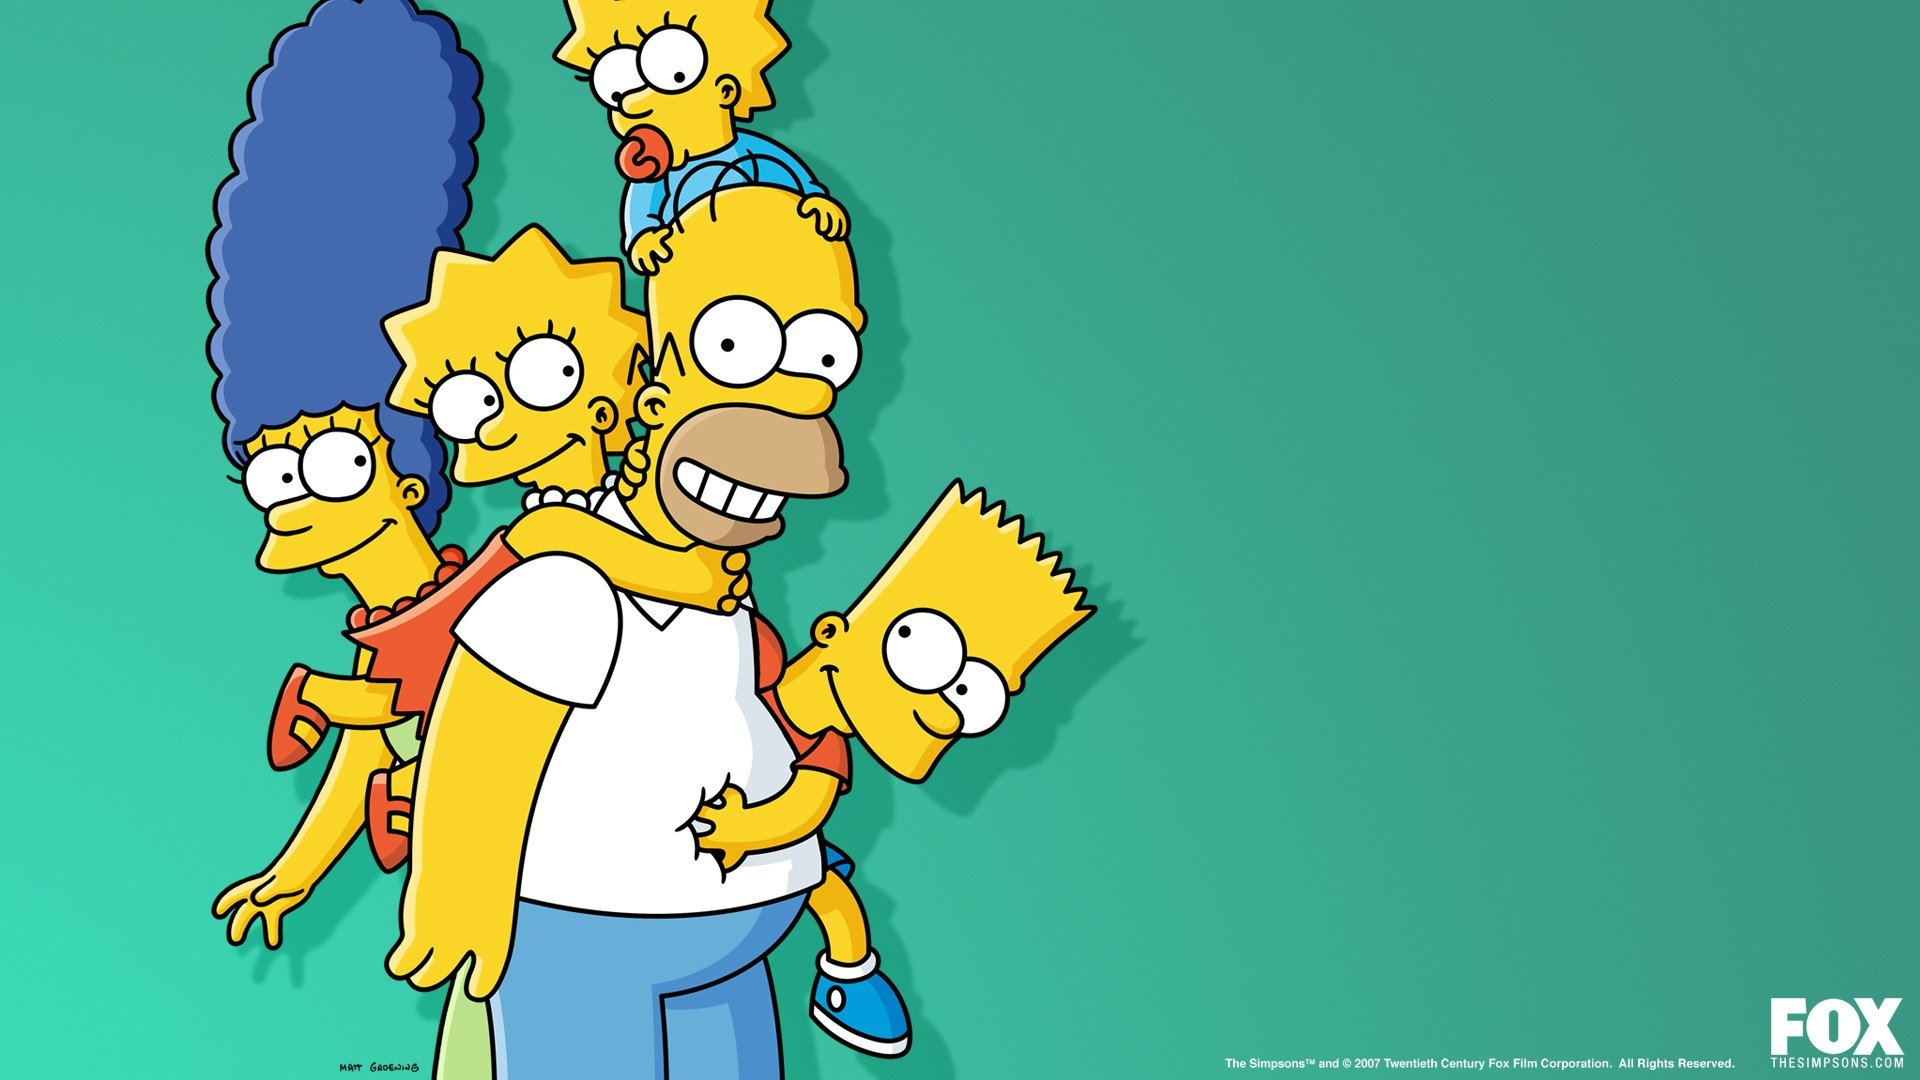 1920x1080 Family Homer Simpson The Simpsons Bart Simpson Lisa Simpson Marge Simpson Maggie Simpson wallpaper | | 301548